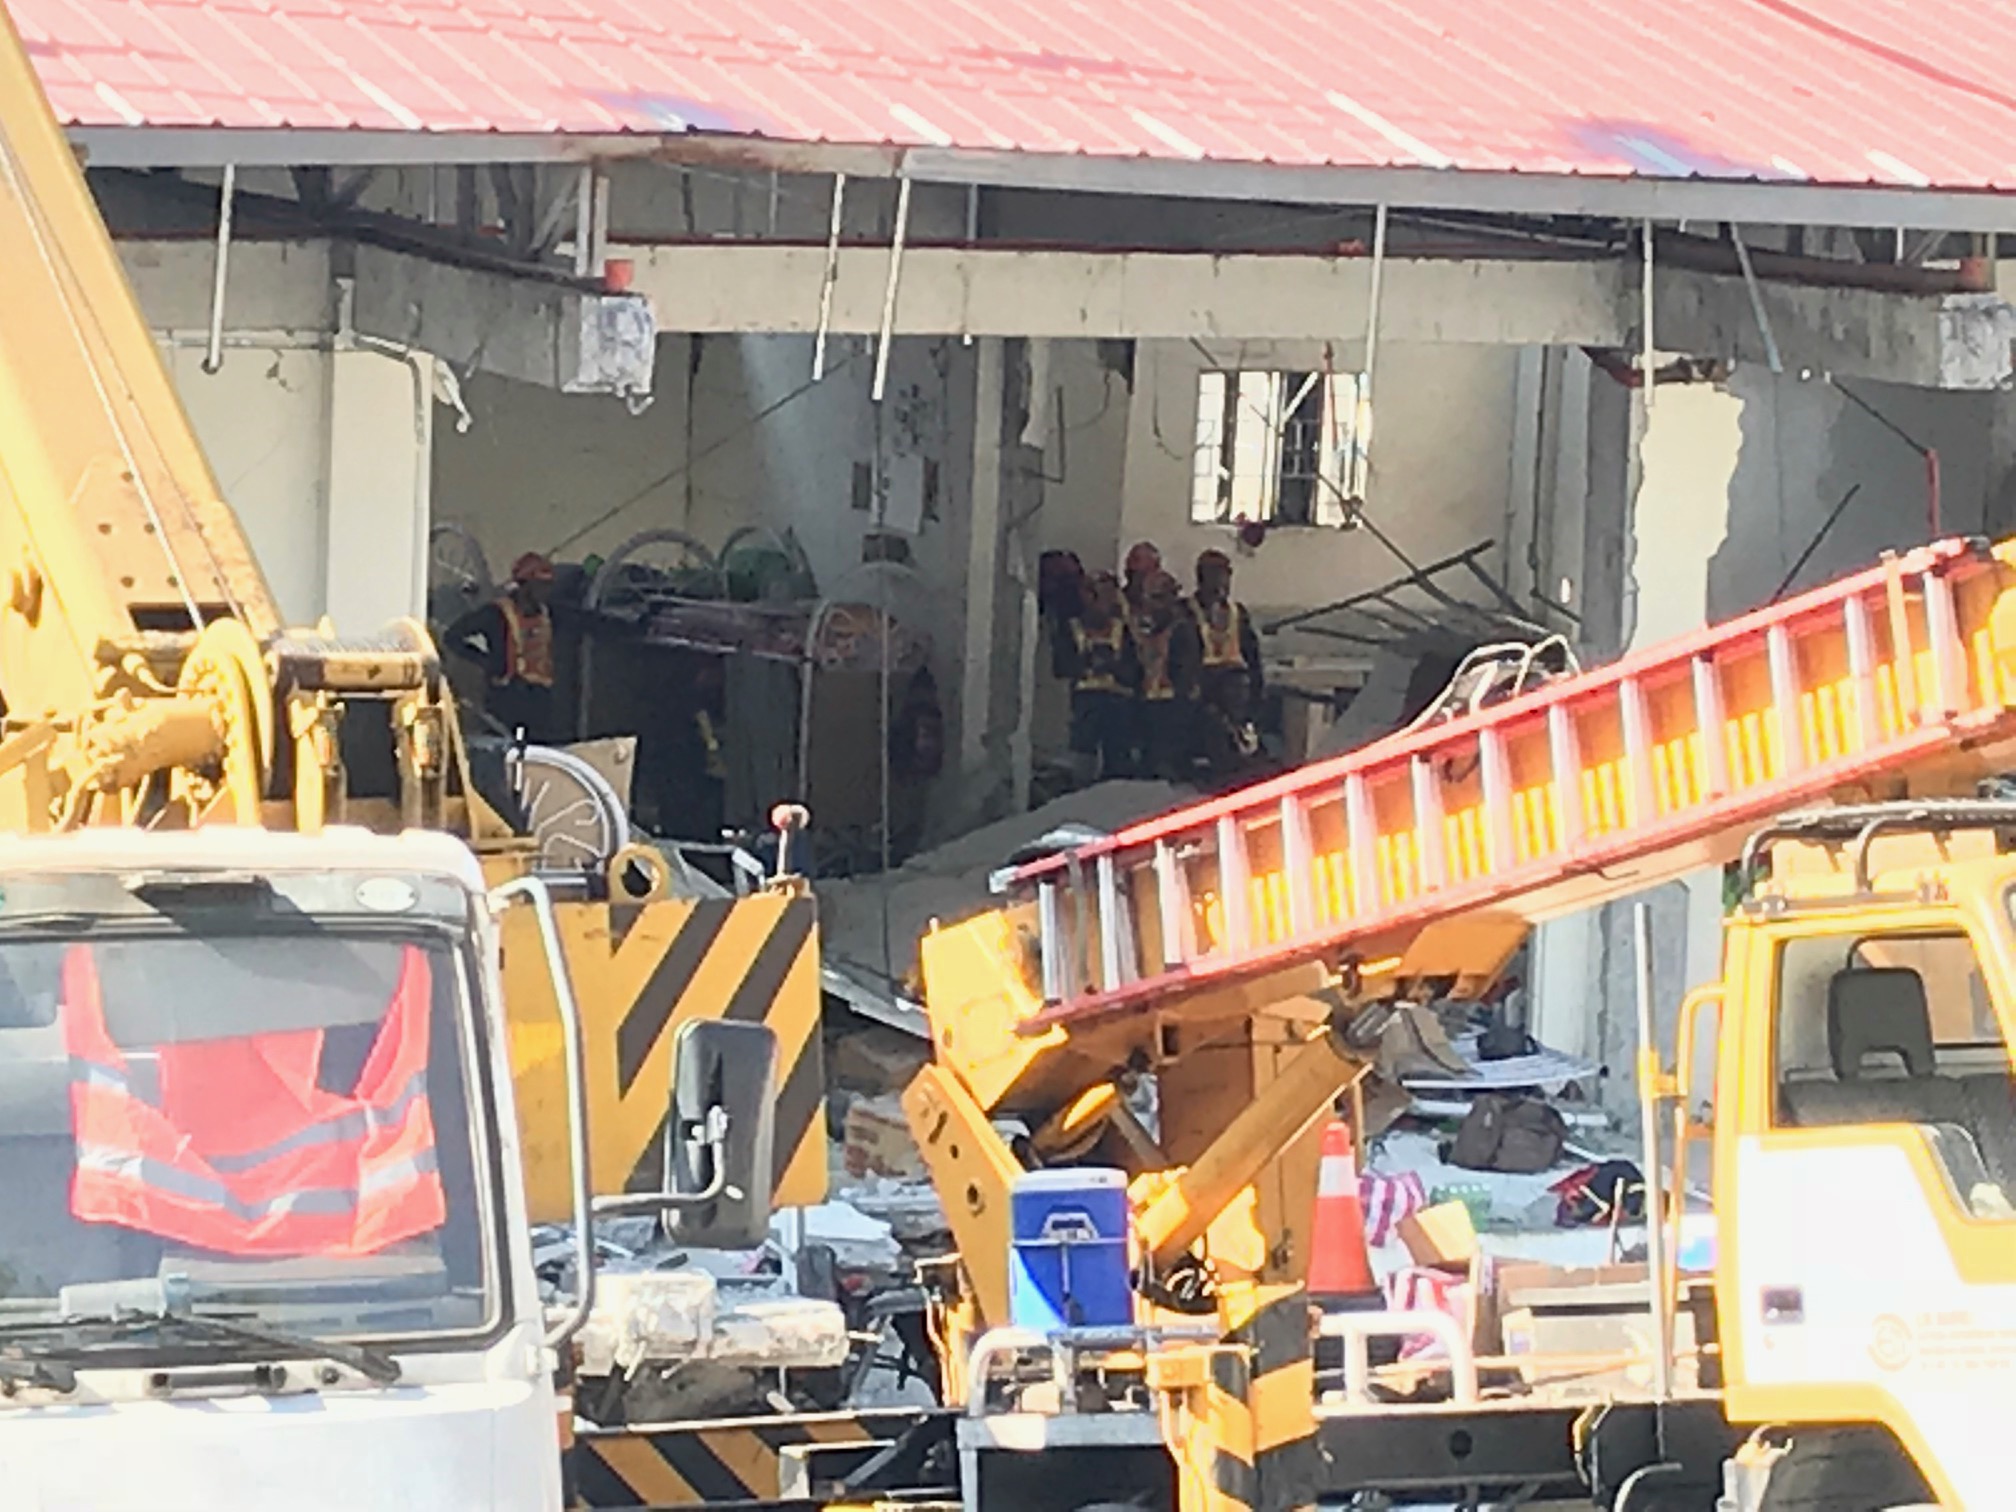 No more signs of life in Pampanga supermarket, but rescue operations will continue